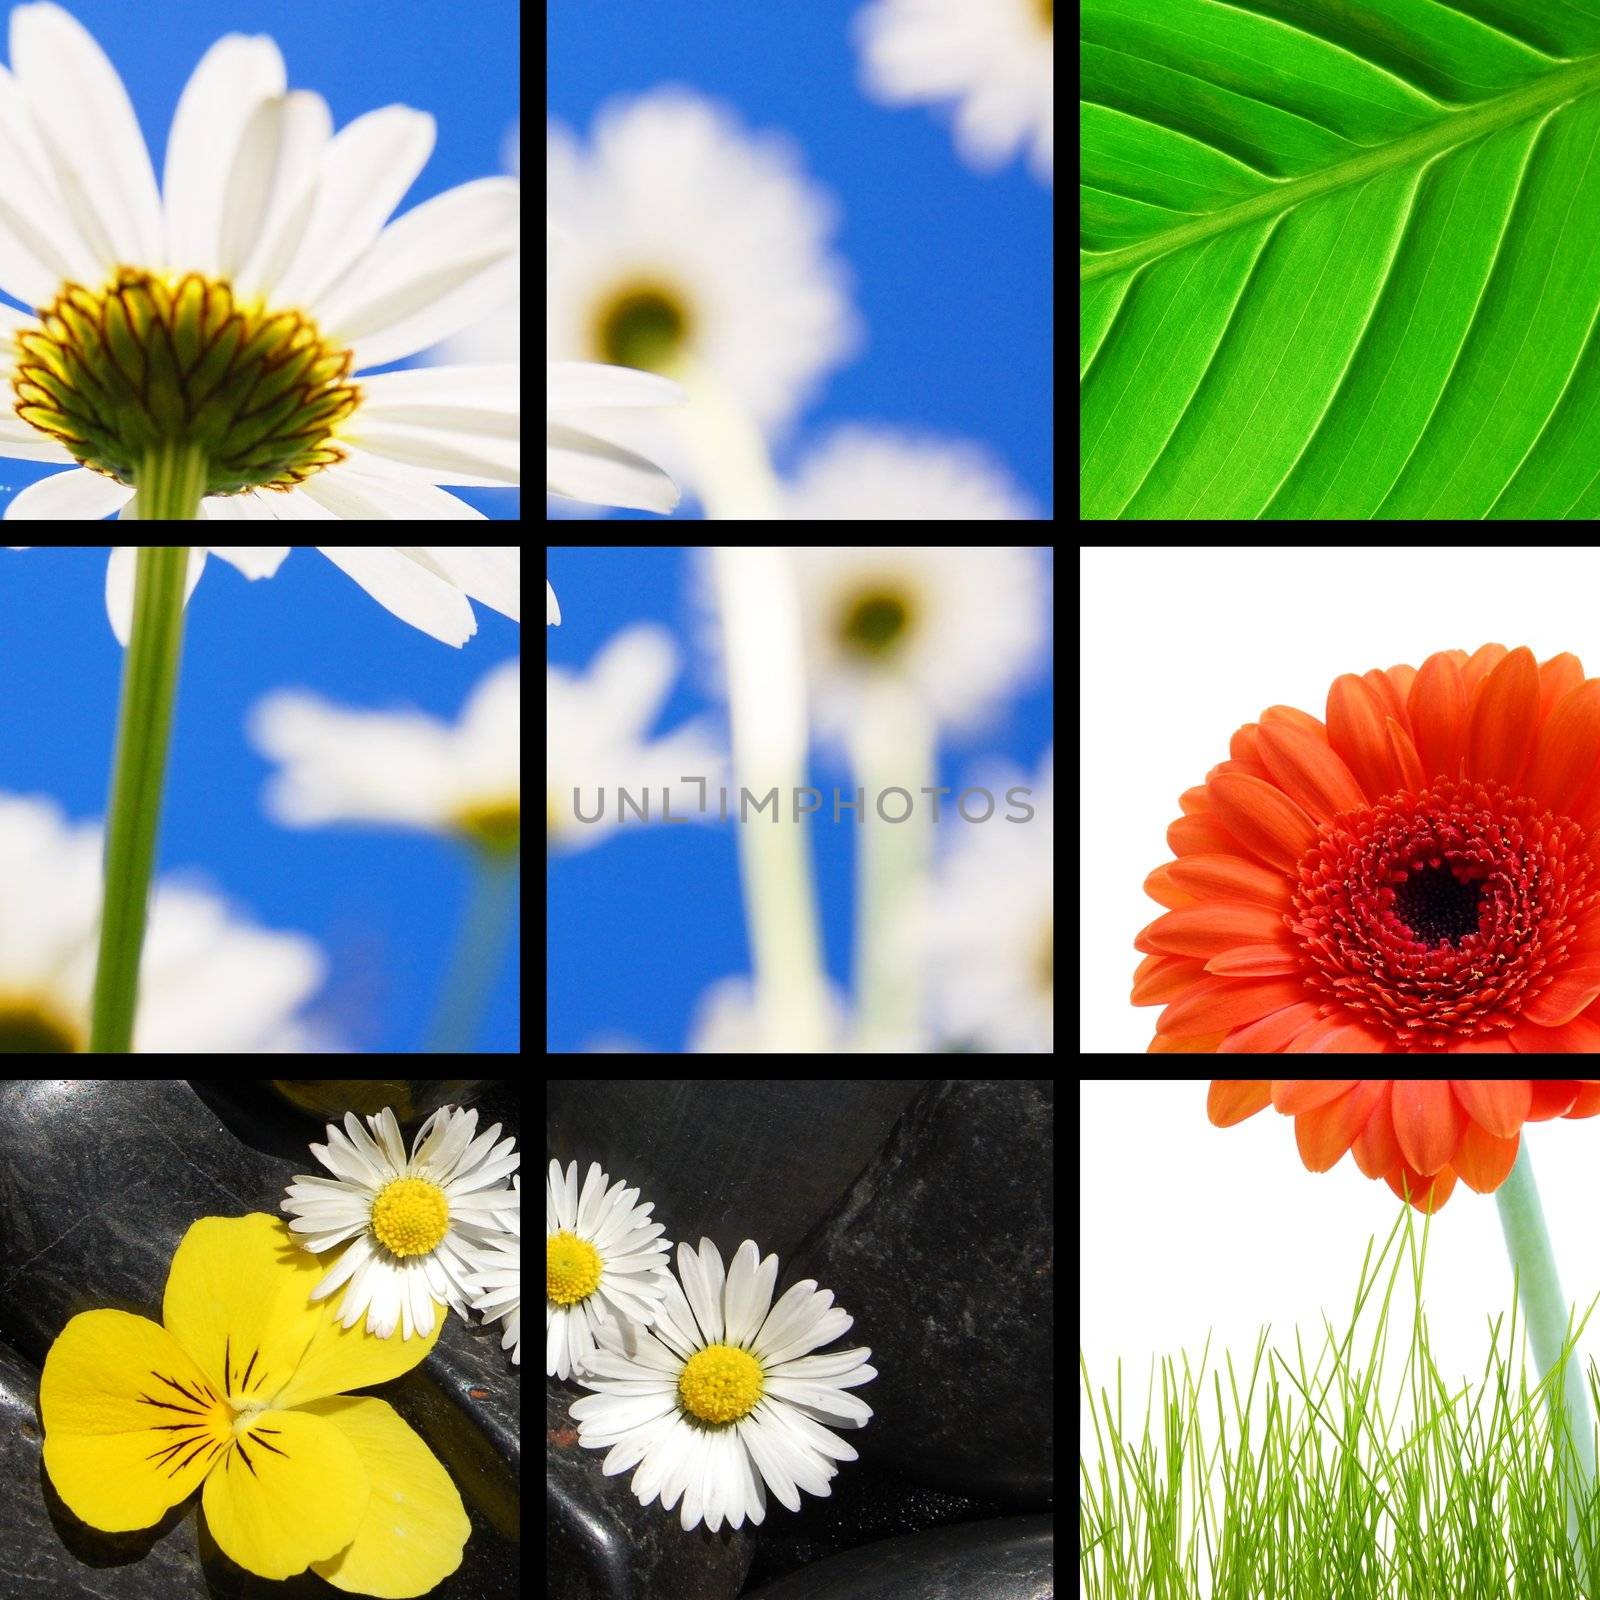 collage or collection of flower images showing summer vacation concept